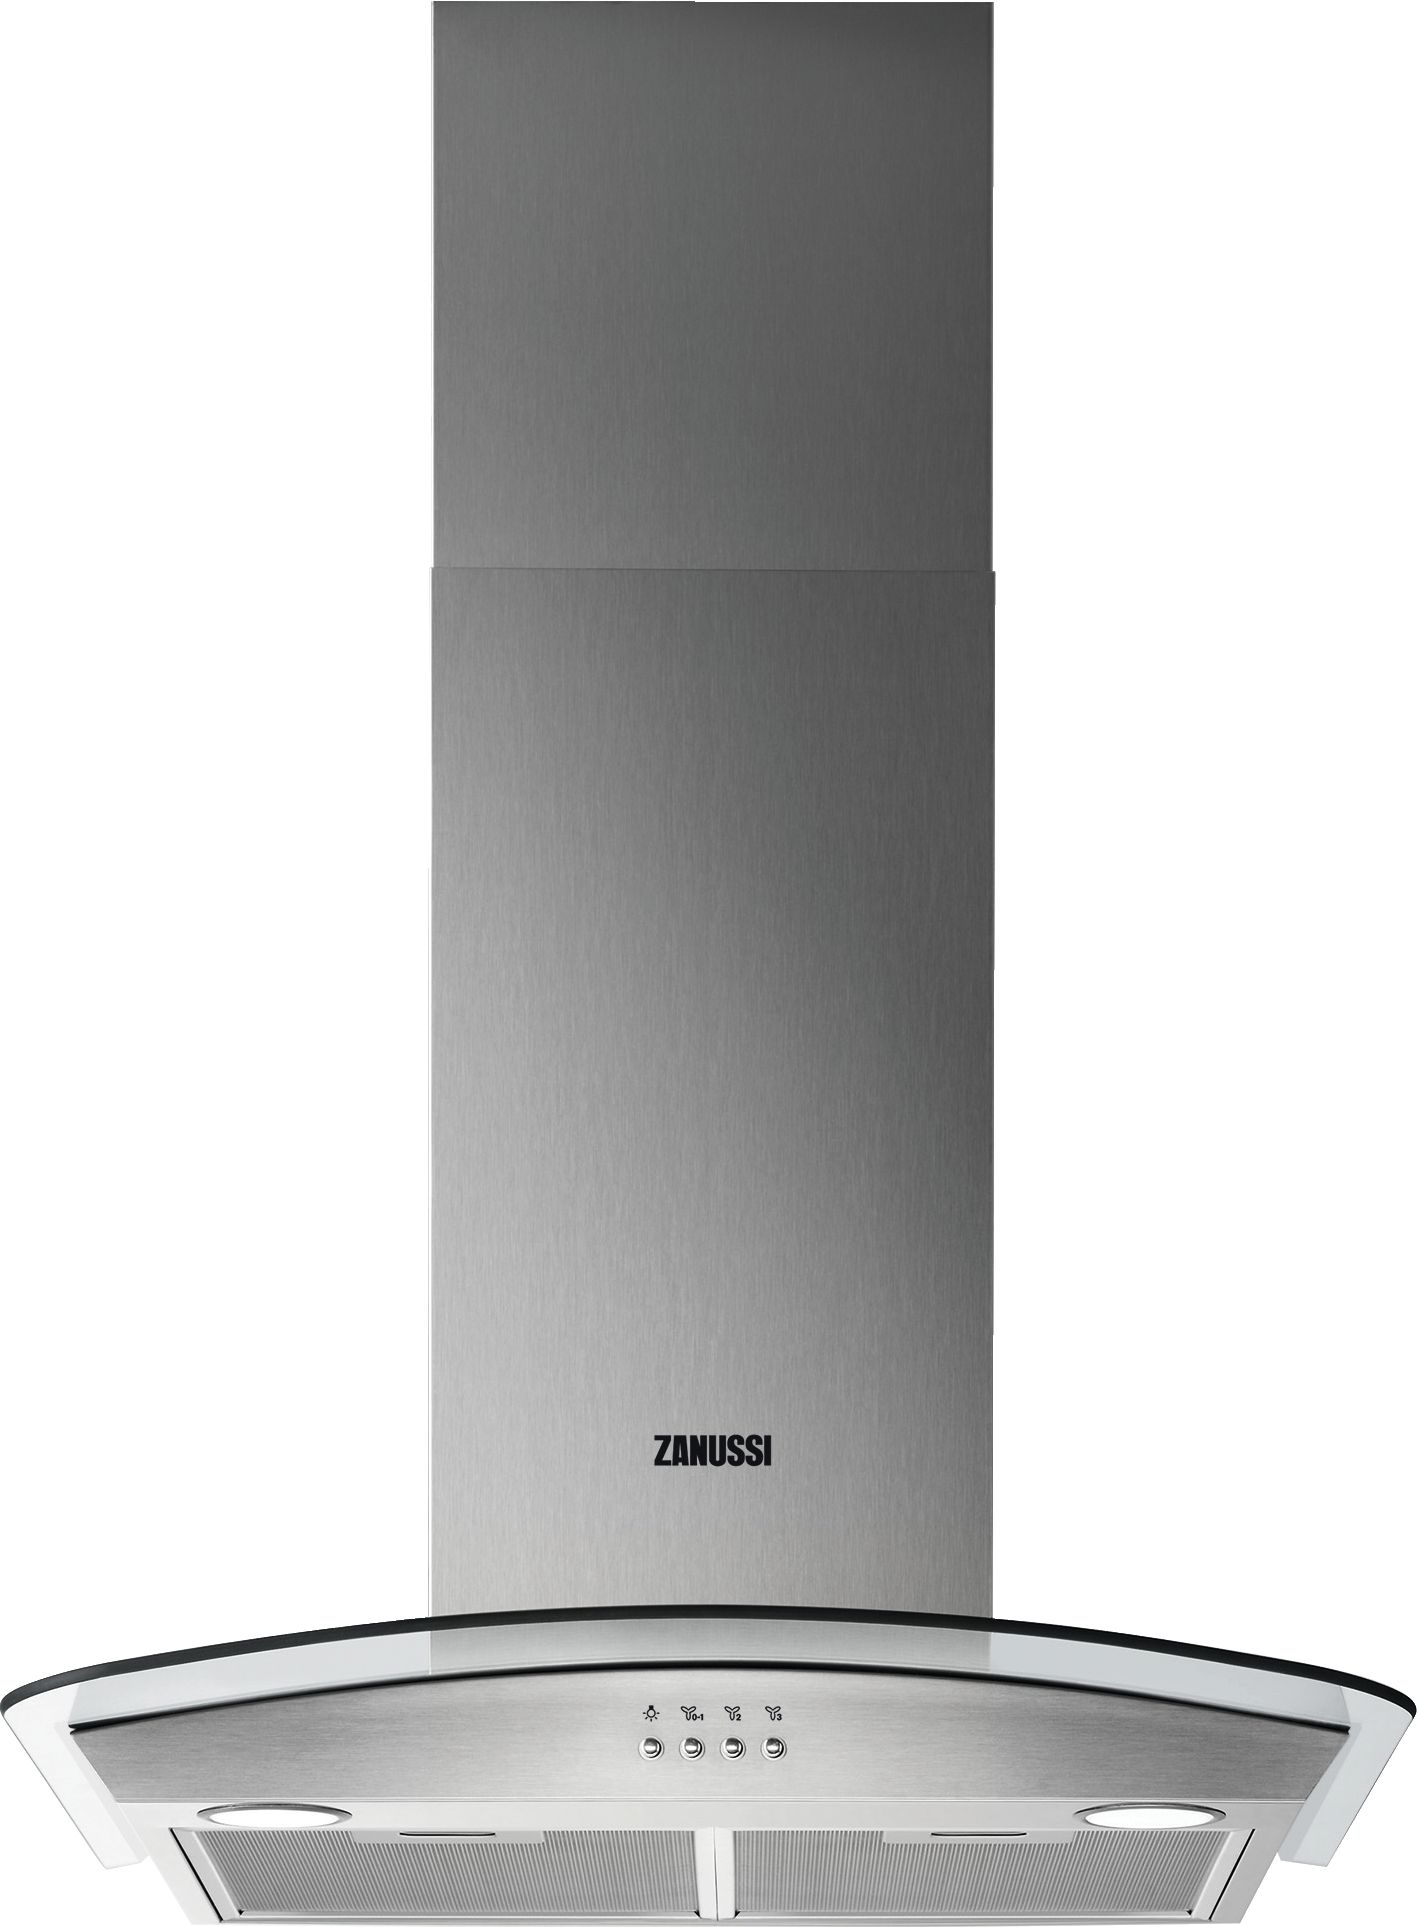 Image of Zanussi ZHC62352X 60cm Chimney Hood with Curved Glass - Stainless Steel